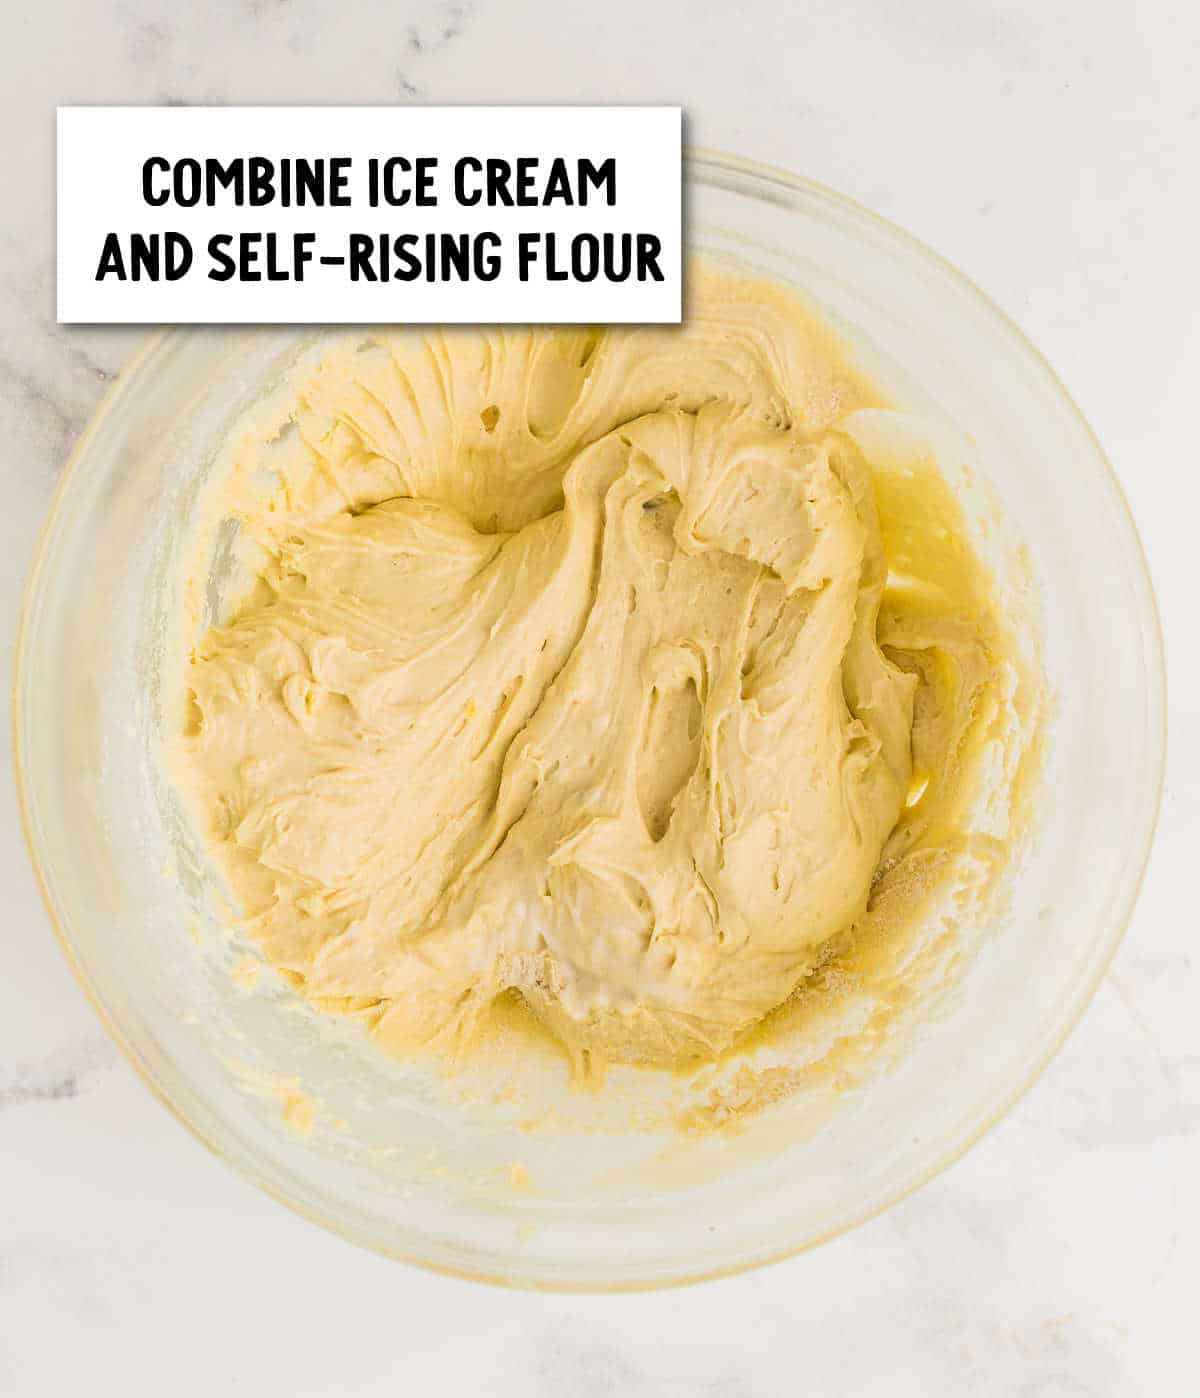 STEP: Combining melted ice cream and self-rising flour.